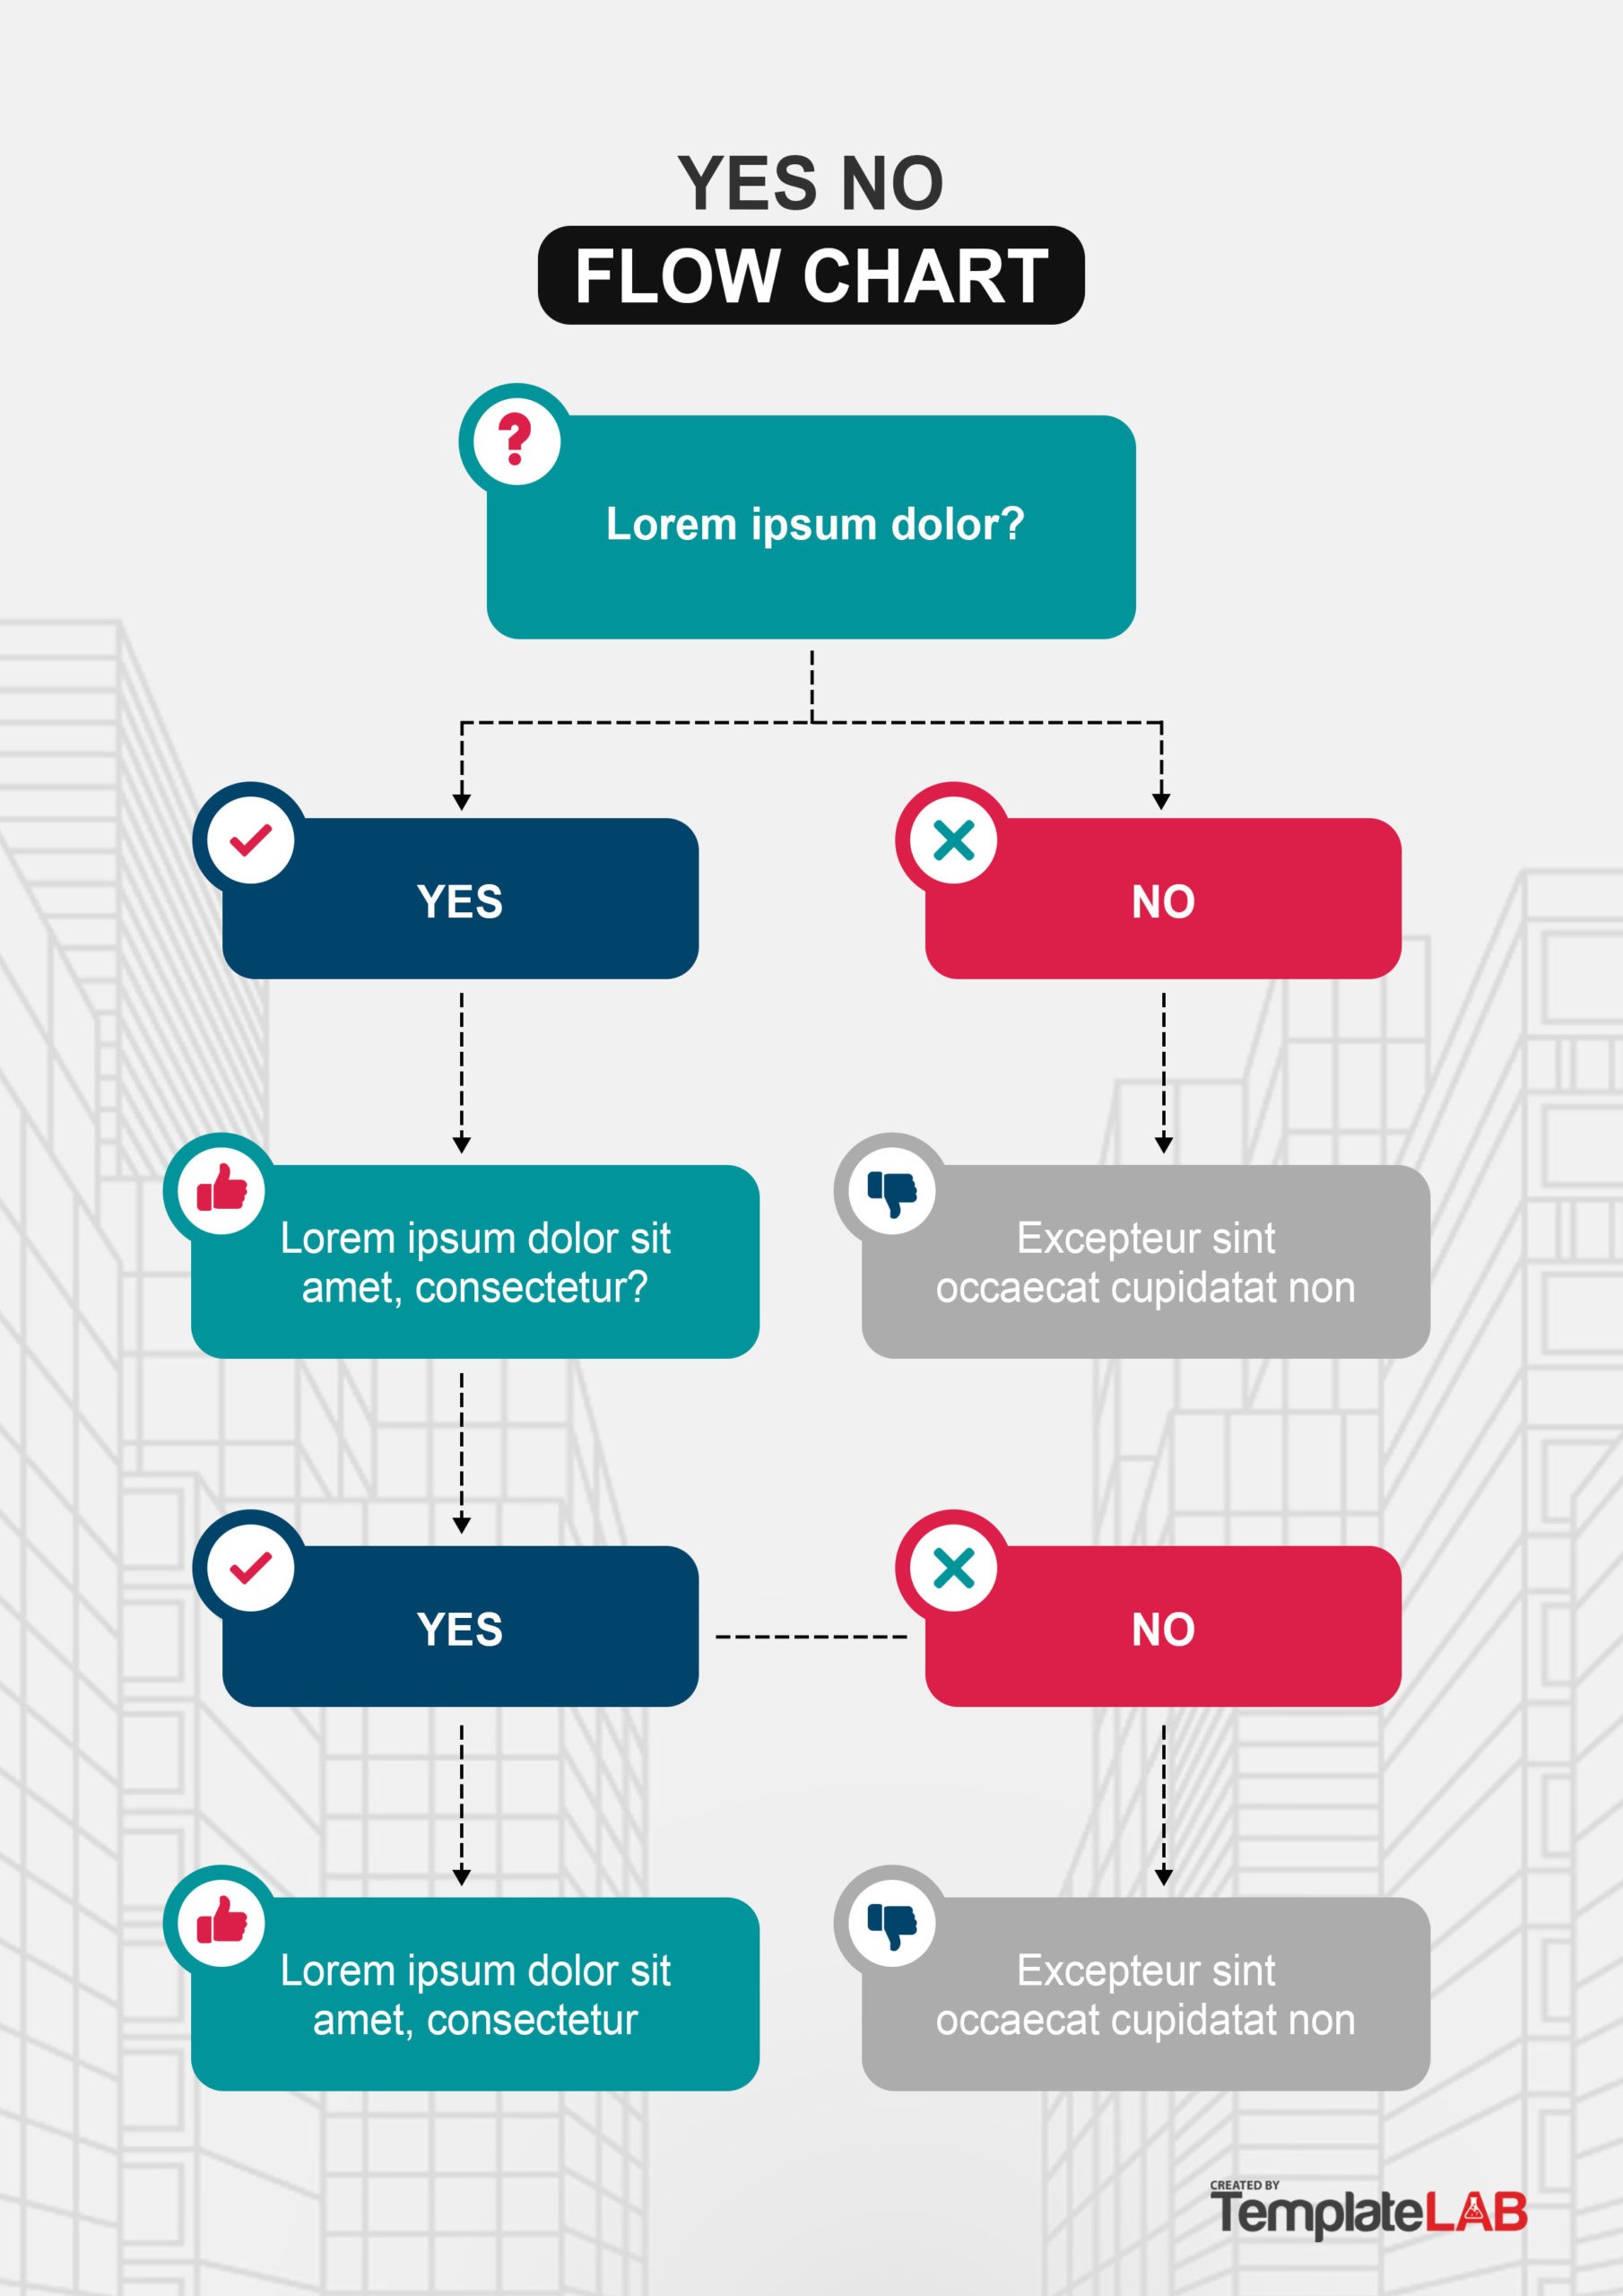 26 Fantastic Flow Chart Templates [Word, Excel, Power Point]